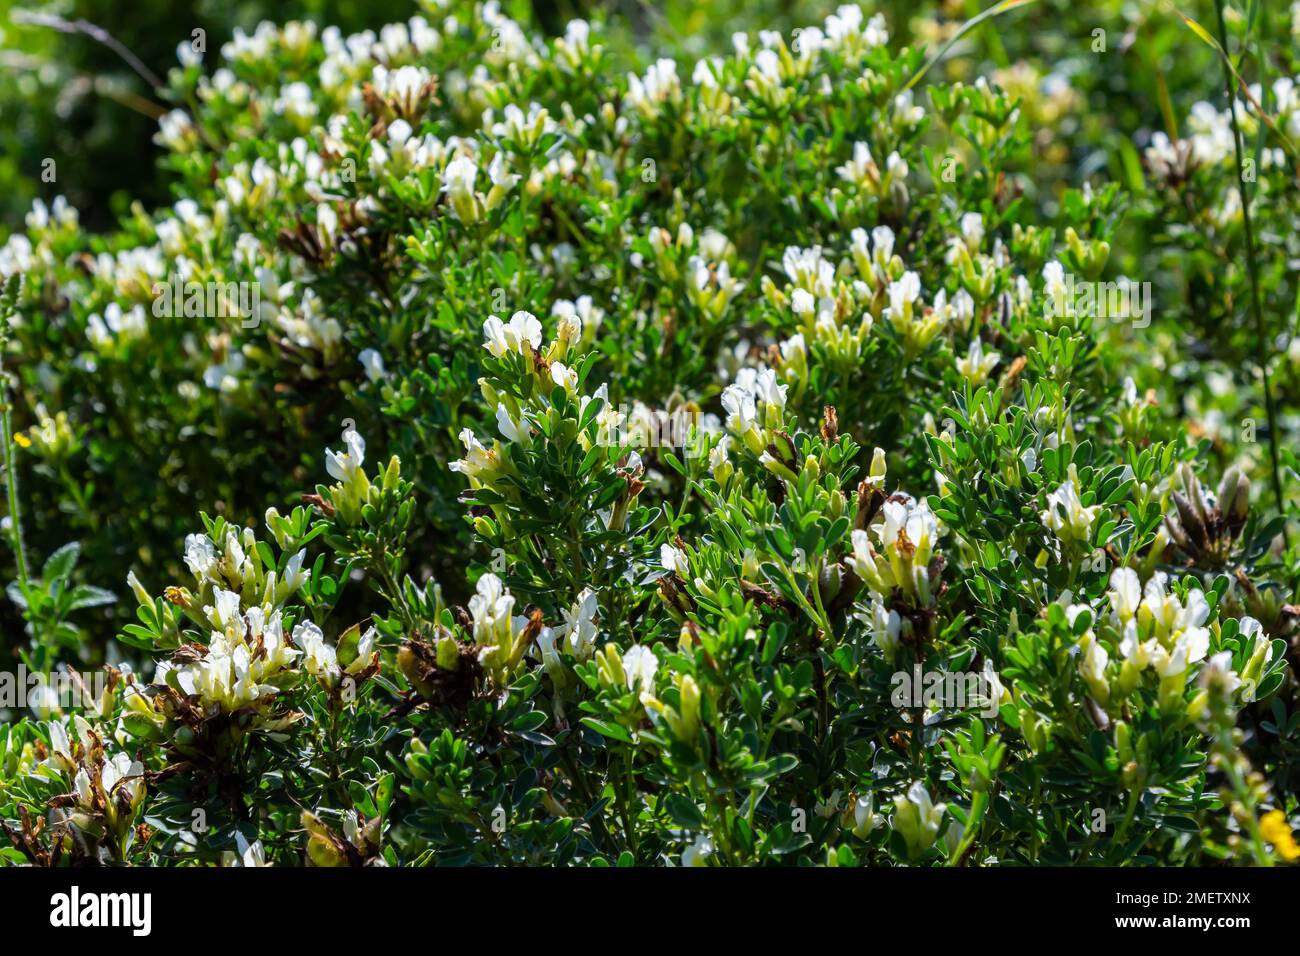 In the spring Chamaecytisus ruthenicus blooms in the wild. Stock Photo